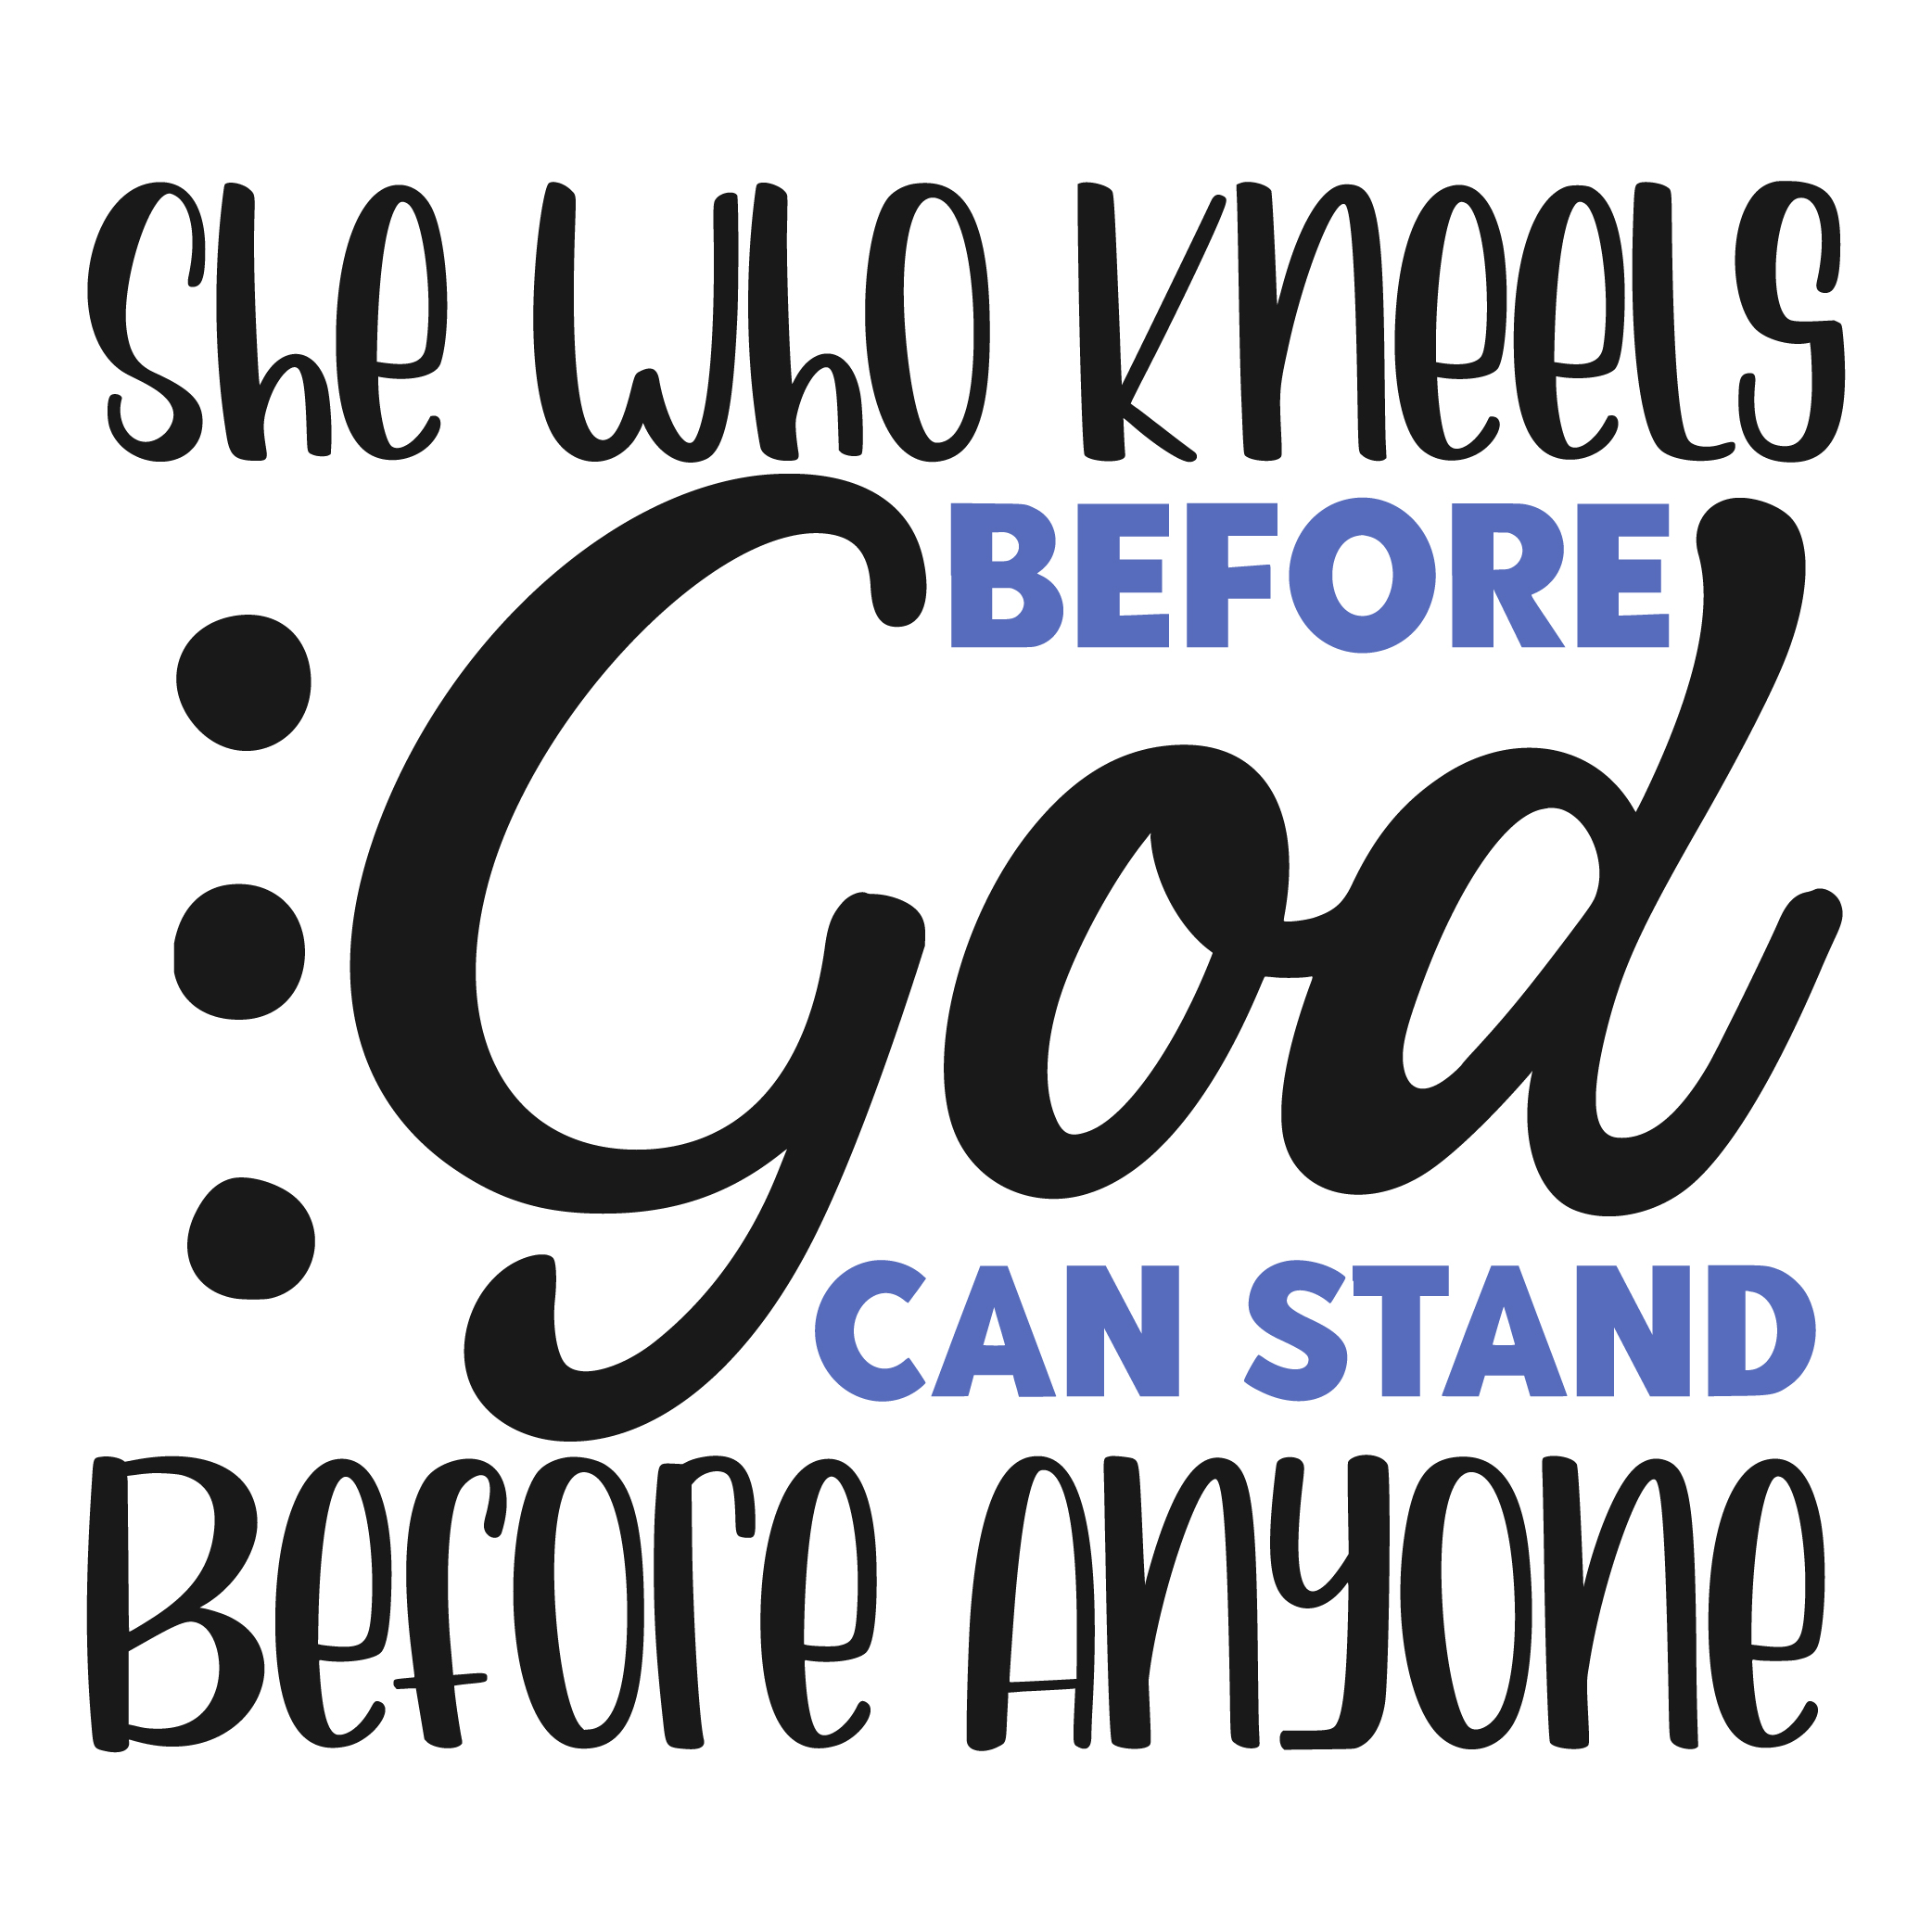 she who kneels before god can stand before anyone woman SVG Boss Lady  Black Lives Matter  Lady Woman Diva Tshirt Cut File Cricut Silhouette Women Empowerment svg Feminism svg Girl Power 